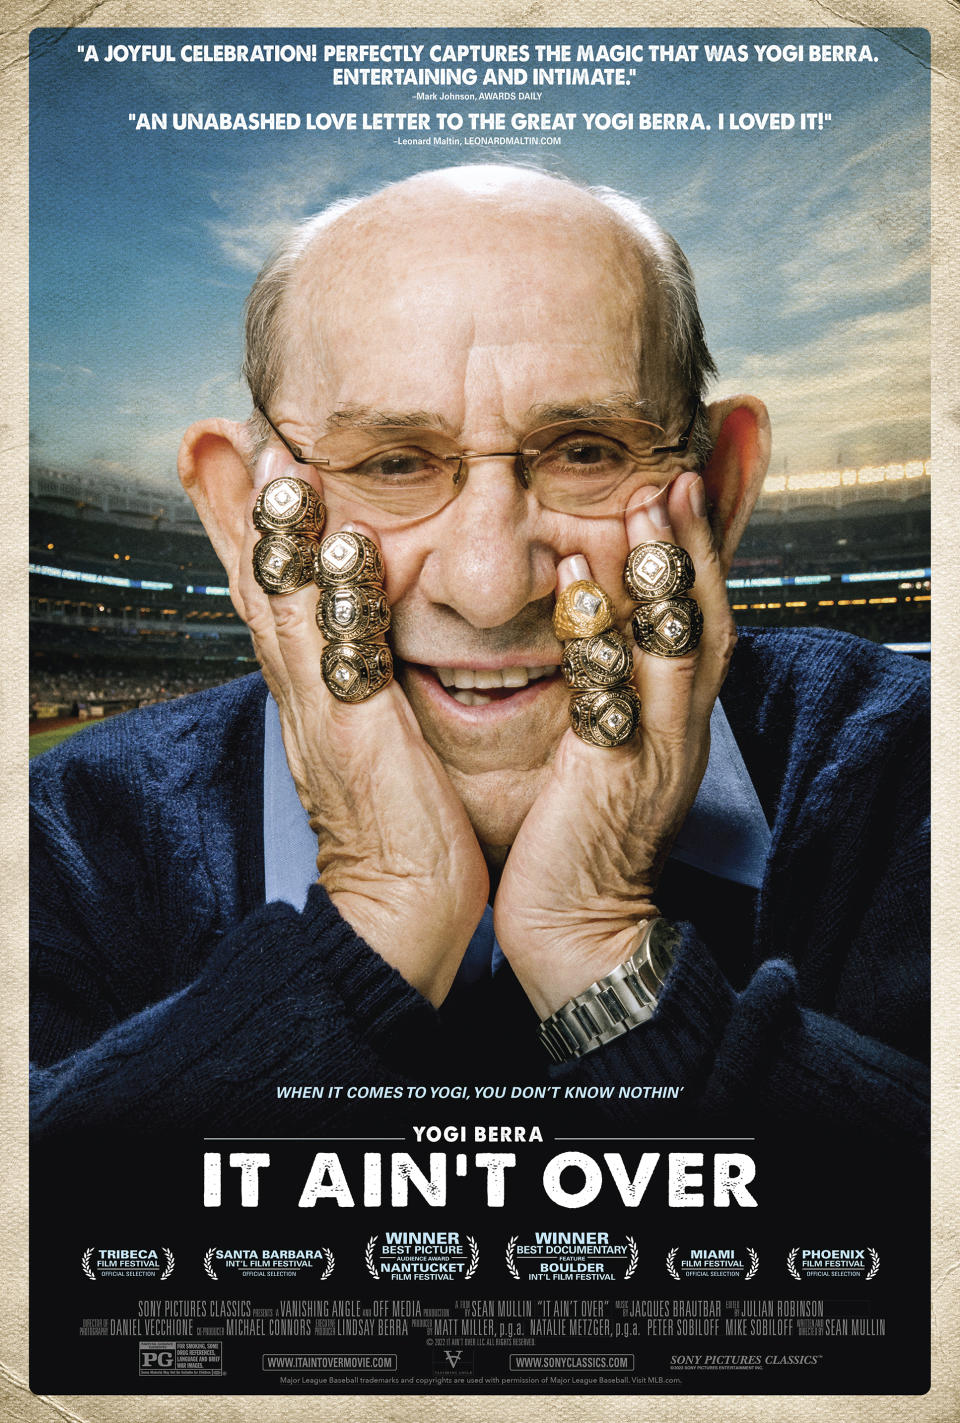 This image released by Sony Pictures Classics shows poster art for "It Ain't Over," a documentary about Yogi Berra. (Sony Pictures Classics via AP)